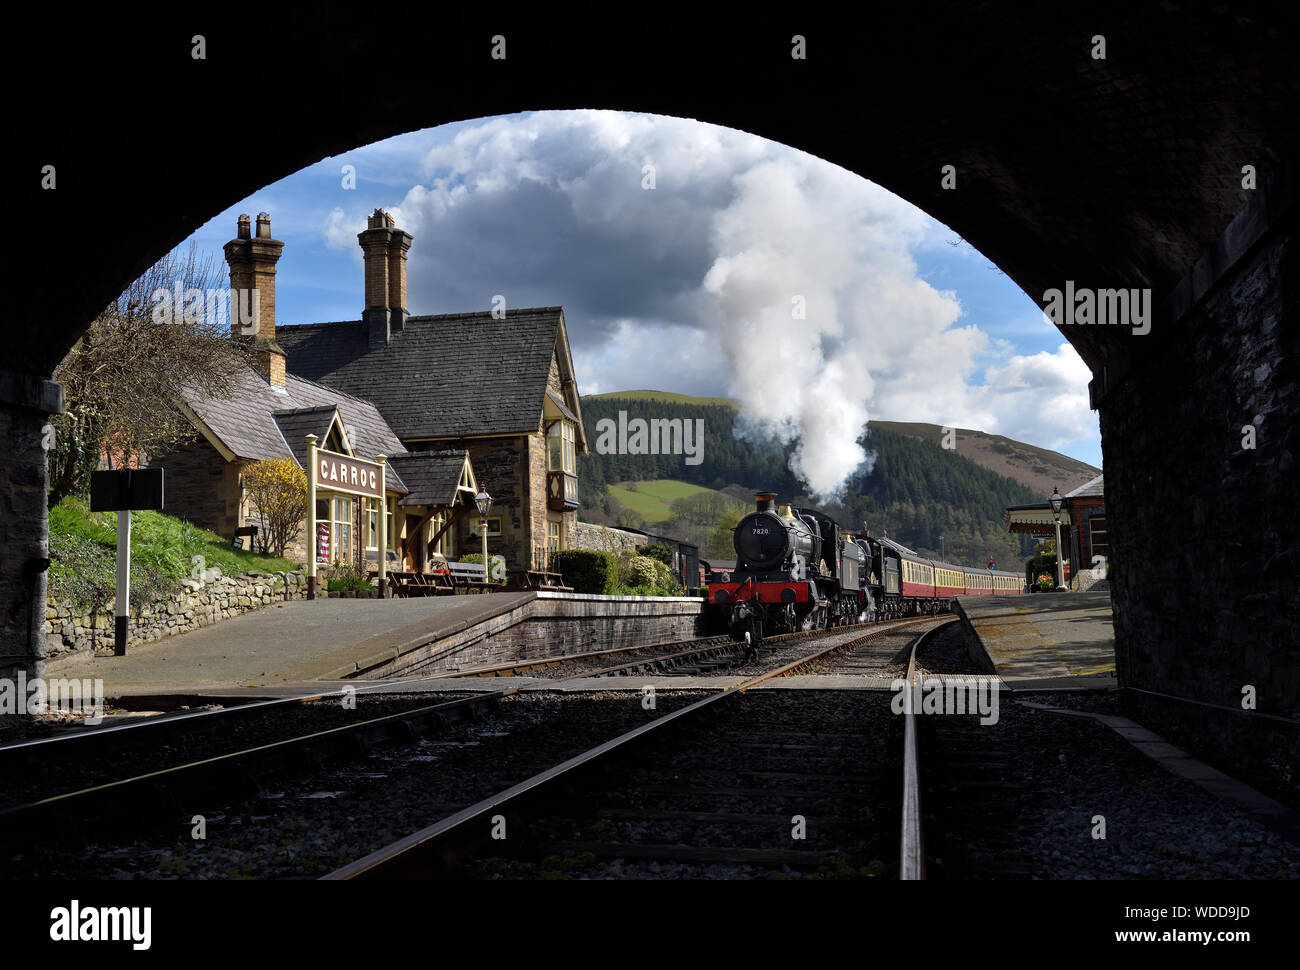 Double heading Manors roll work into Carrog Station on the Llangollen Railway Stock Photo